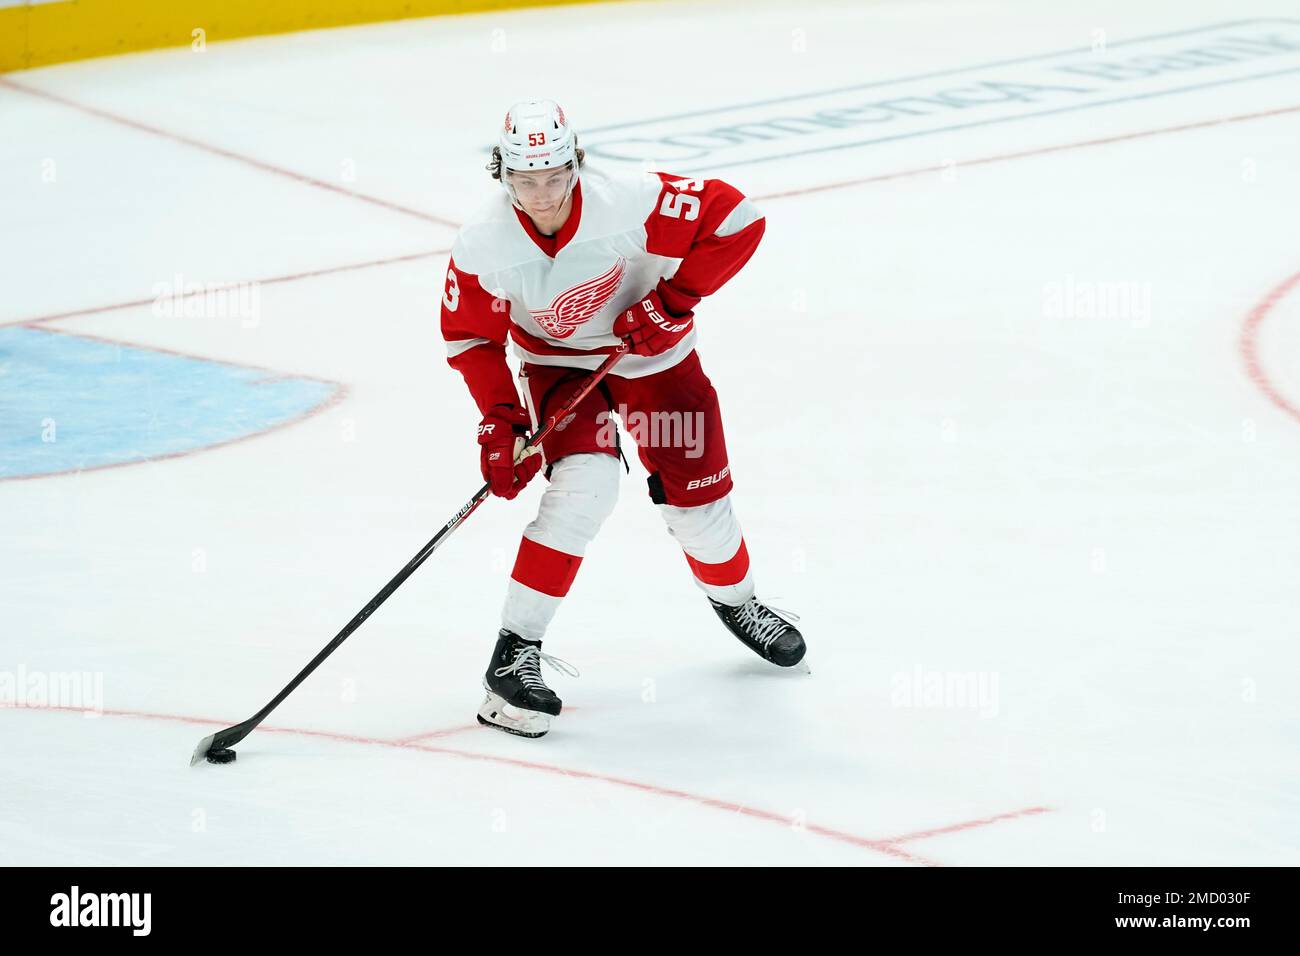 Moritz Seider of the Detroit Red Wings skates the puck against the